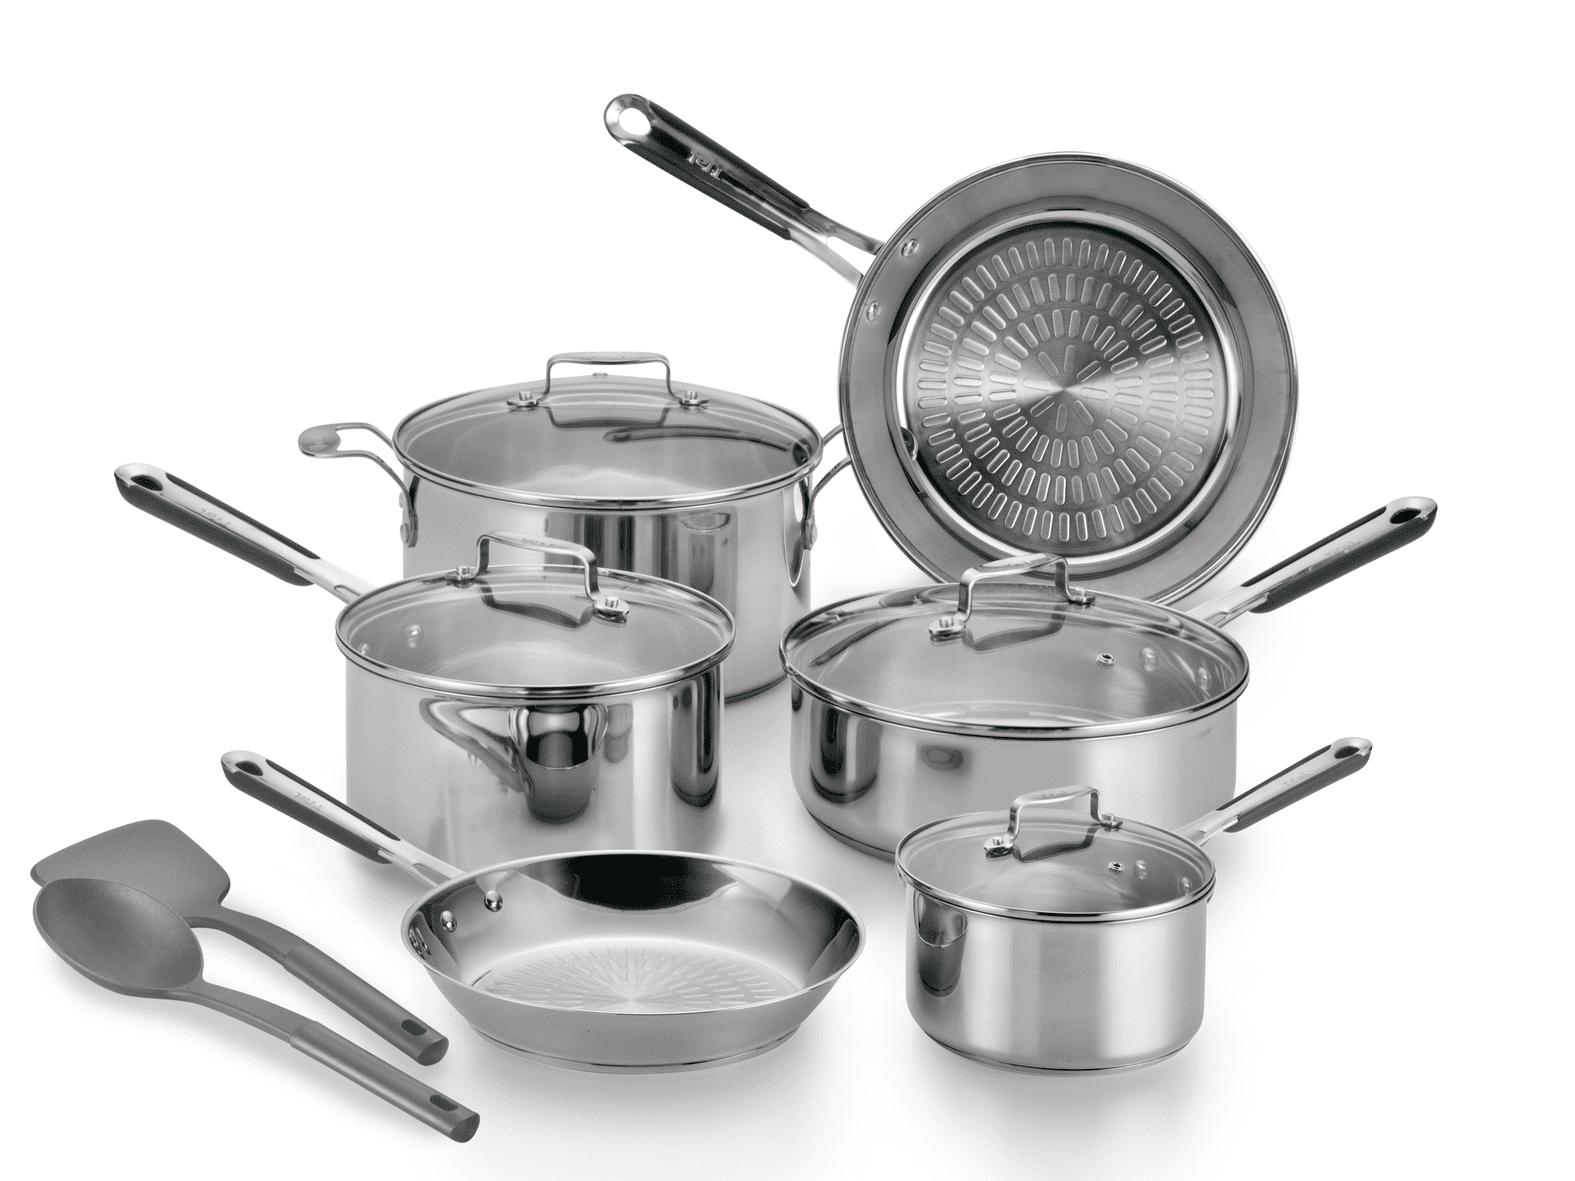 Cuisinart Chef's Classic Stainless Steel 7 Piece Cookware Set (77 